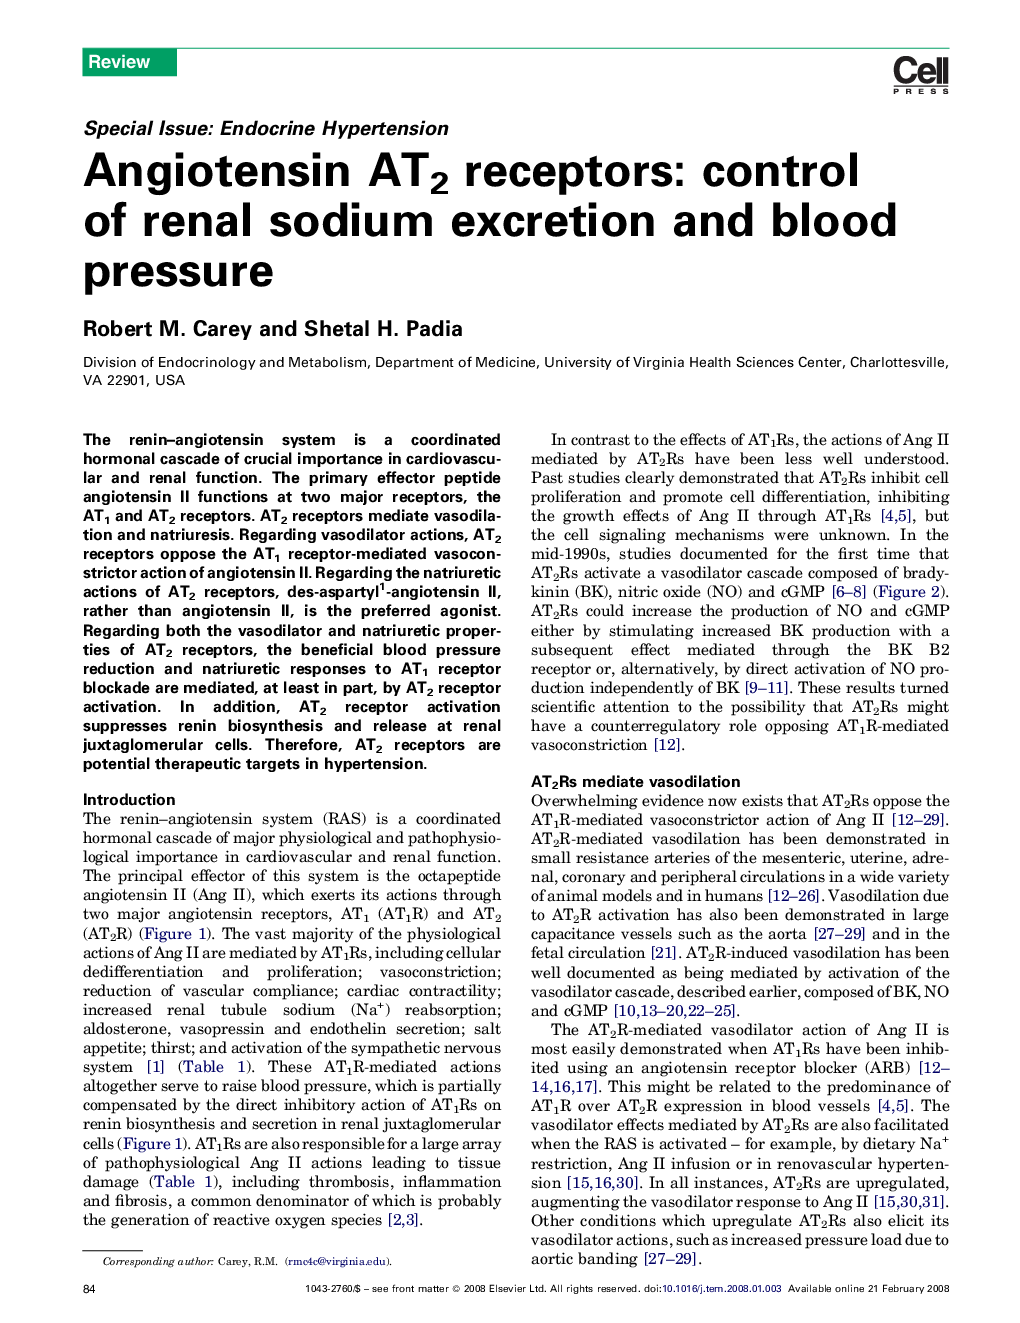 Angiotensin AT2 receptors: control of renal sodium excretion and blood pressure